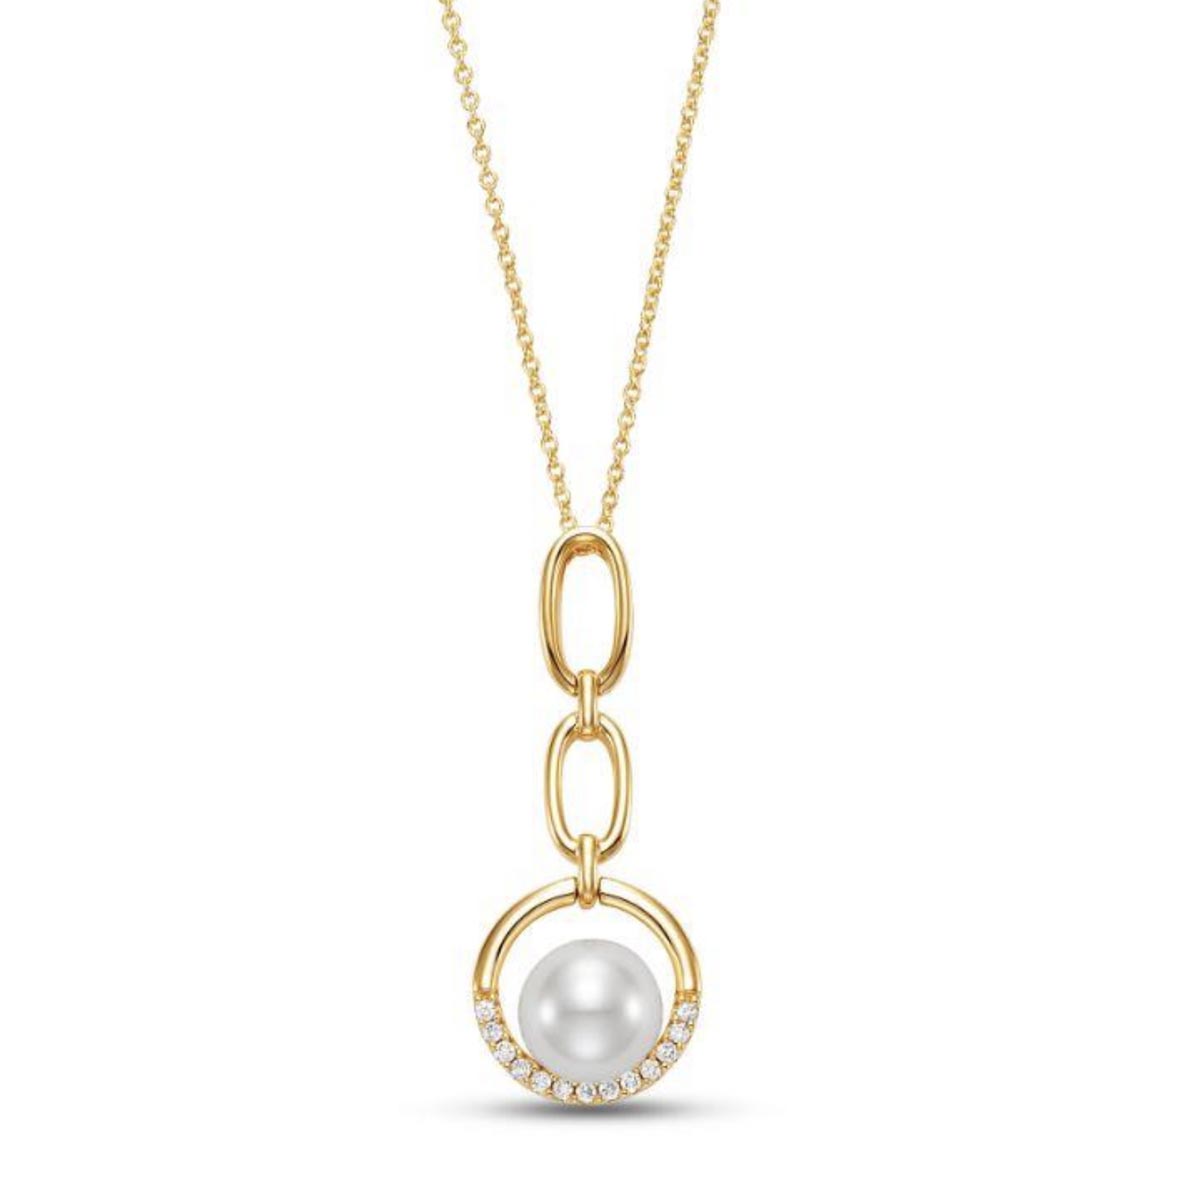 Mastoloni Cultured Freshwater Pearl Necklace in 18kt Yellow Gold with Diamonds (8-8.5mm pearl and 1/10ct tw)